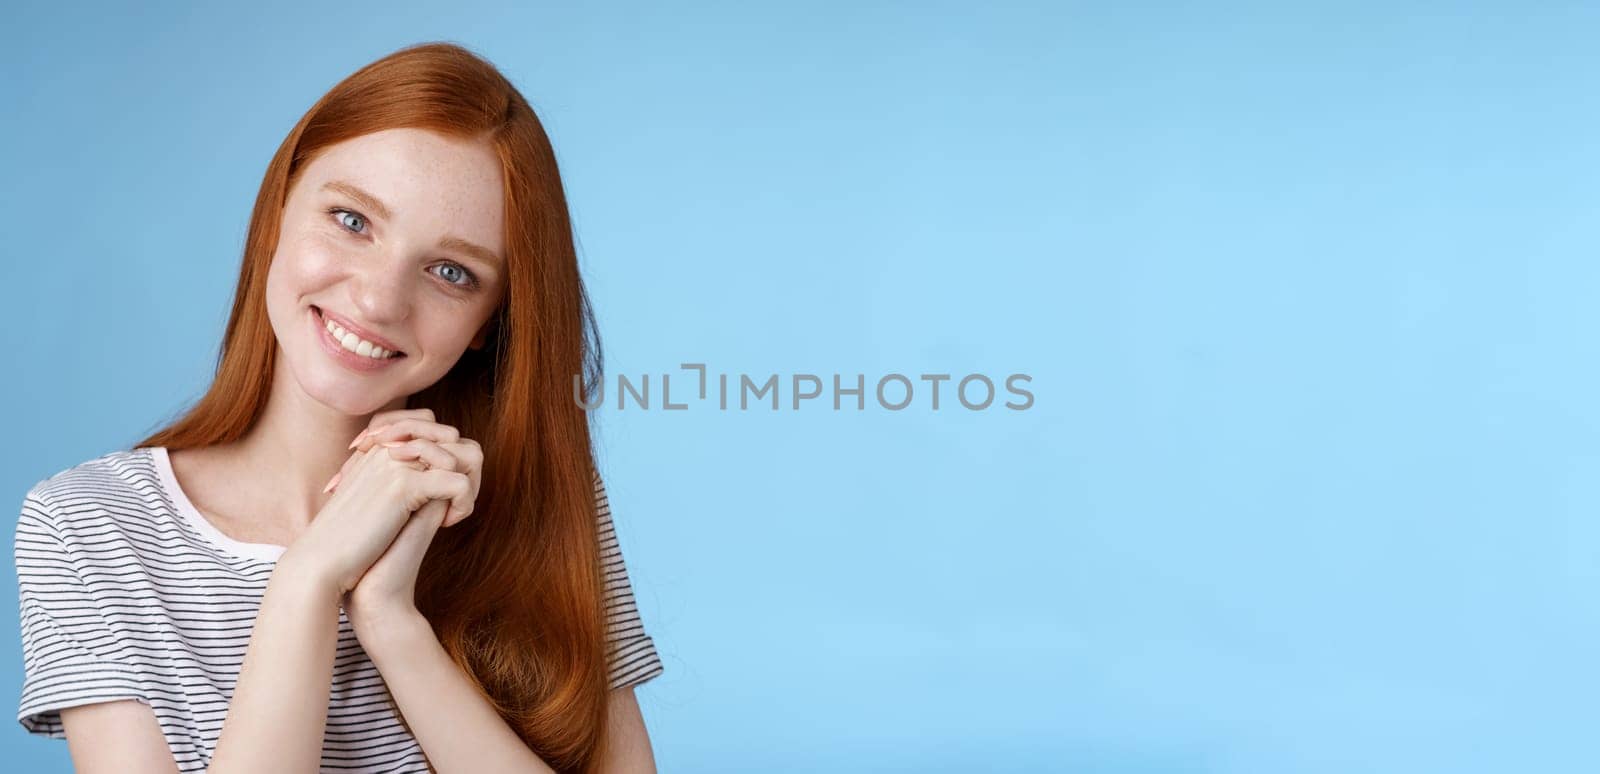 Romantic tender lovely redhead girlfriend tilting head press palms together smiling touched look sympathy check out cute picture friend standing delighted amused, heartwarming moment.